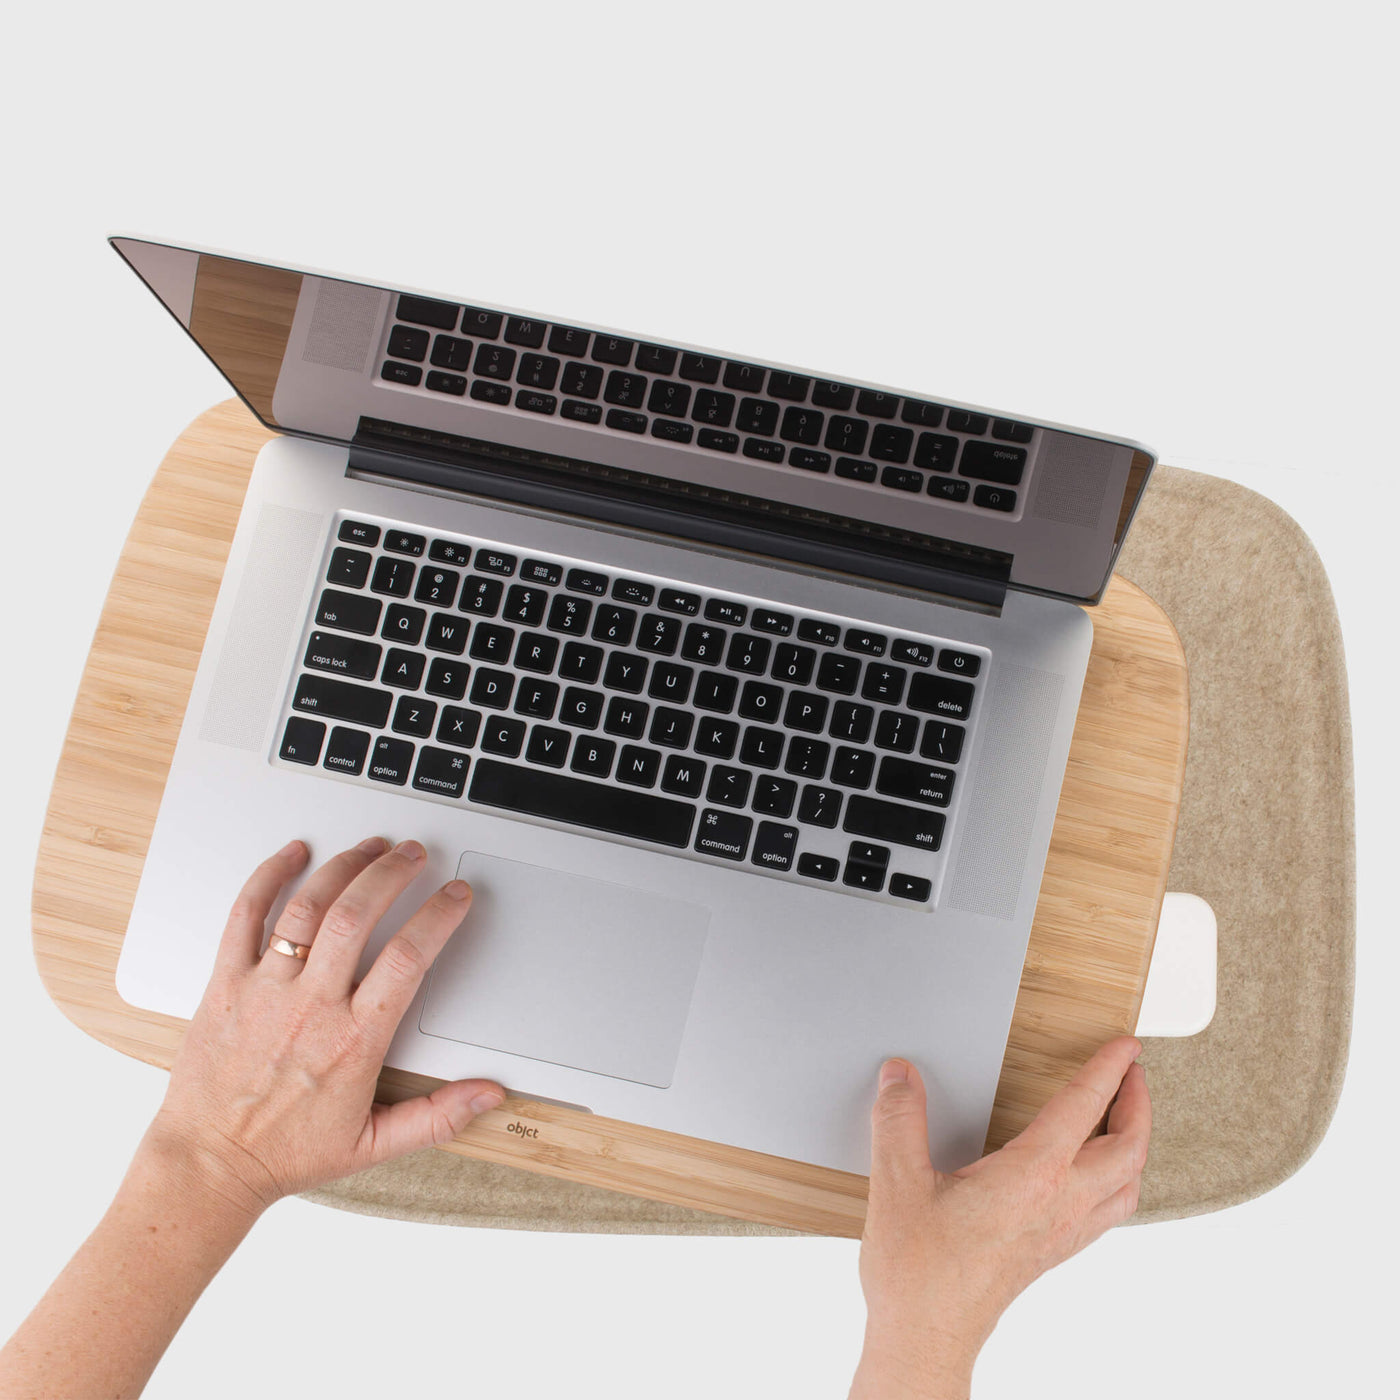 Bamboo Laptop Lap Desk with Pillow Cushion - S